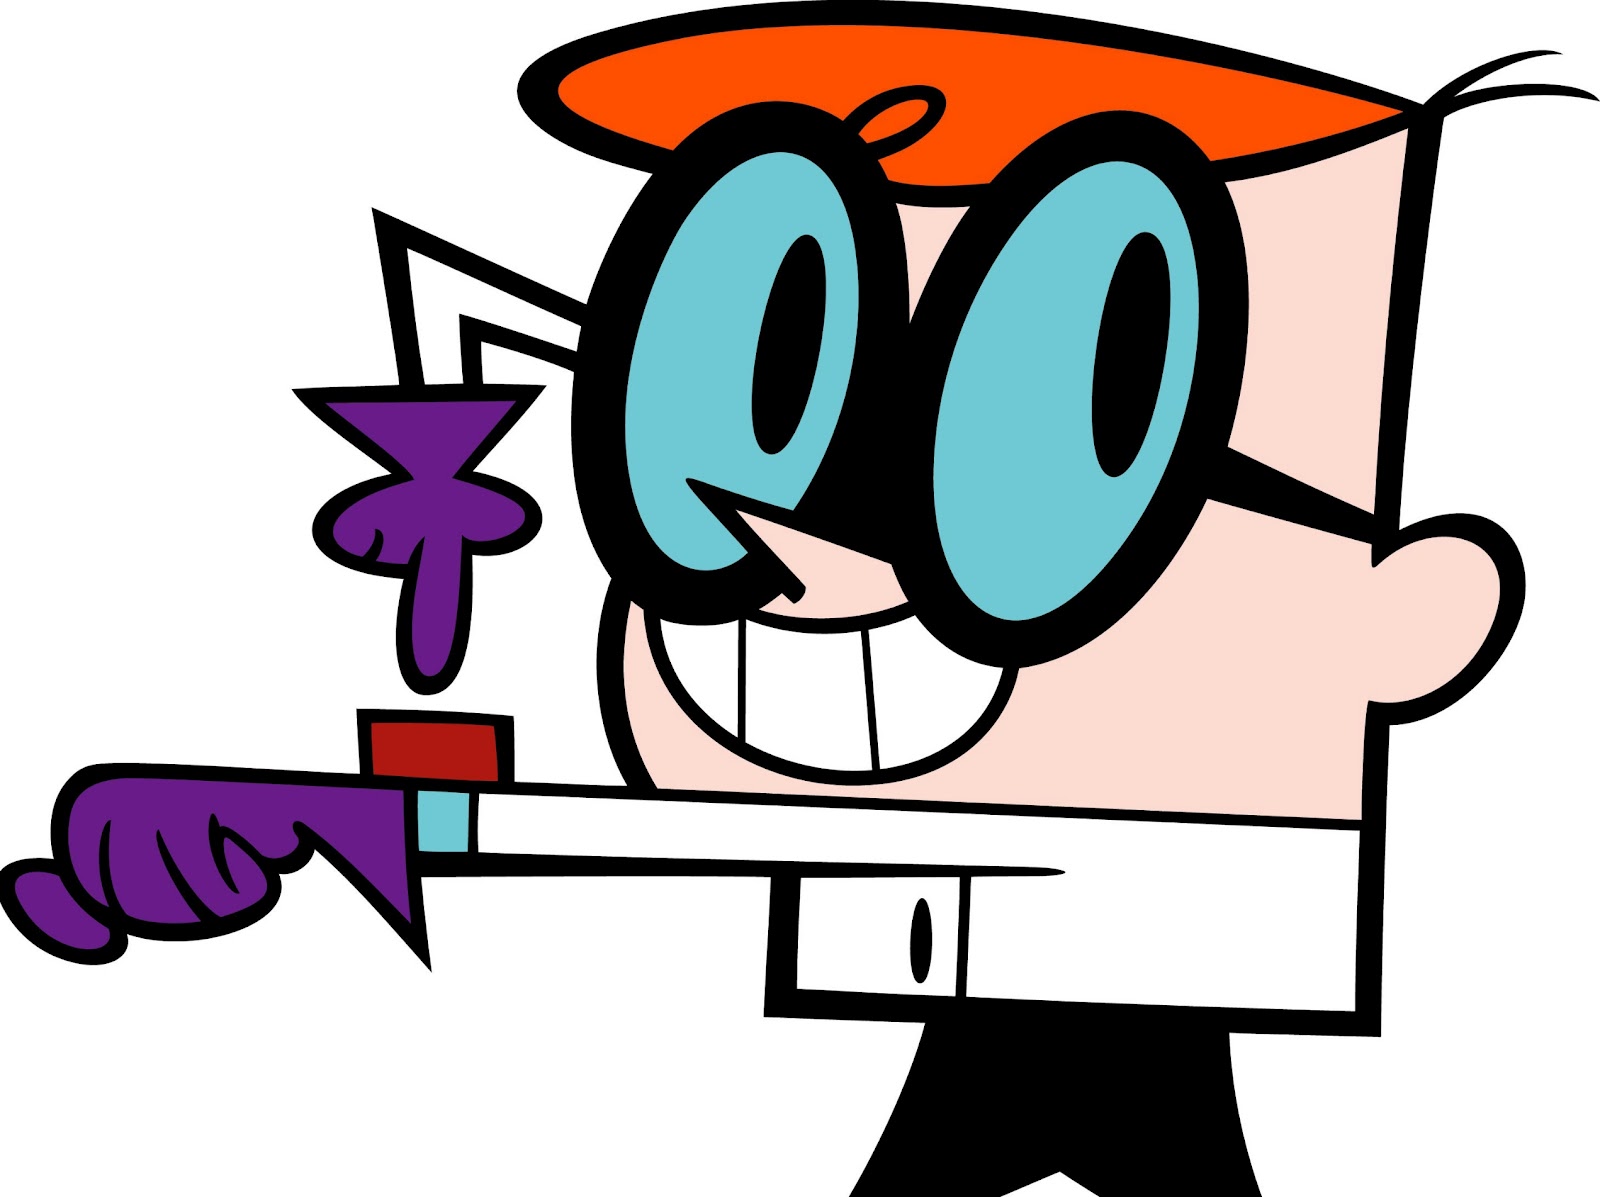 Dexter S Laboratory Hd Wallpapers High Definition